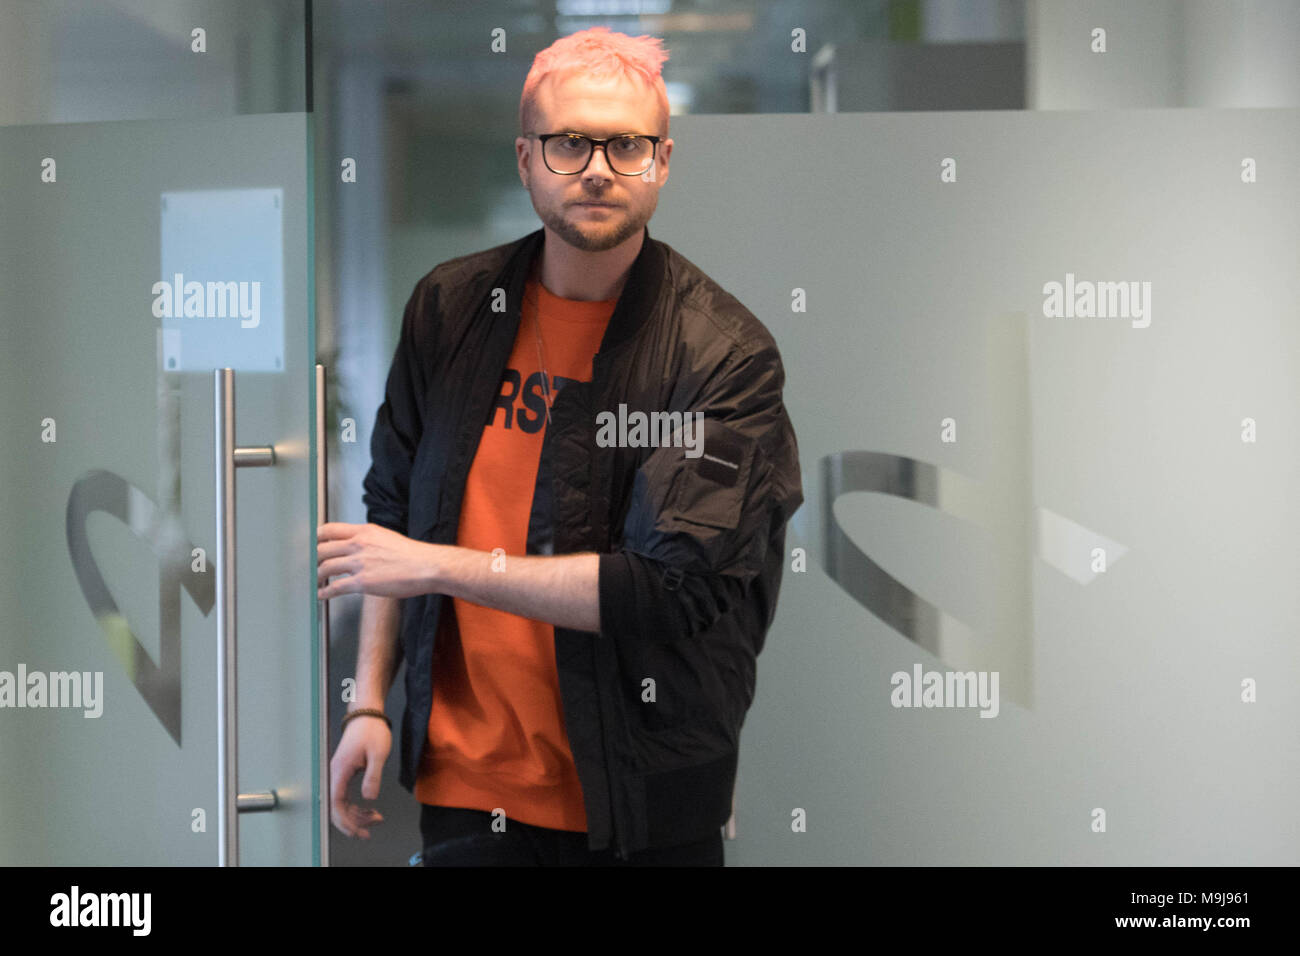 Whistleblower Christopher Wylie at a press conference in central London, as information provided by whistleblowers Mr Wylie and Shahmir Sanni, provides grounds to suspect that the Vote Leave campaign broke electoral law during the 2016 EU referendum campaign, according to a legal opinion obtained by the men's lawyers. Stock Photo